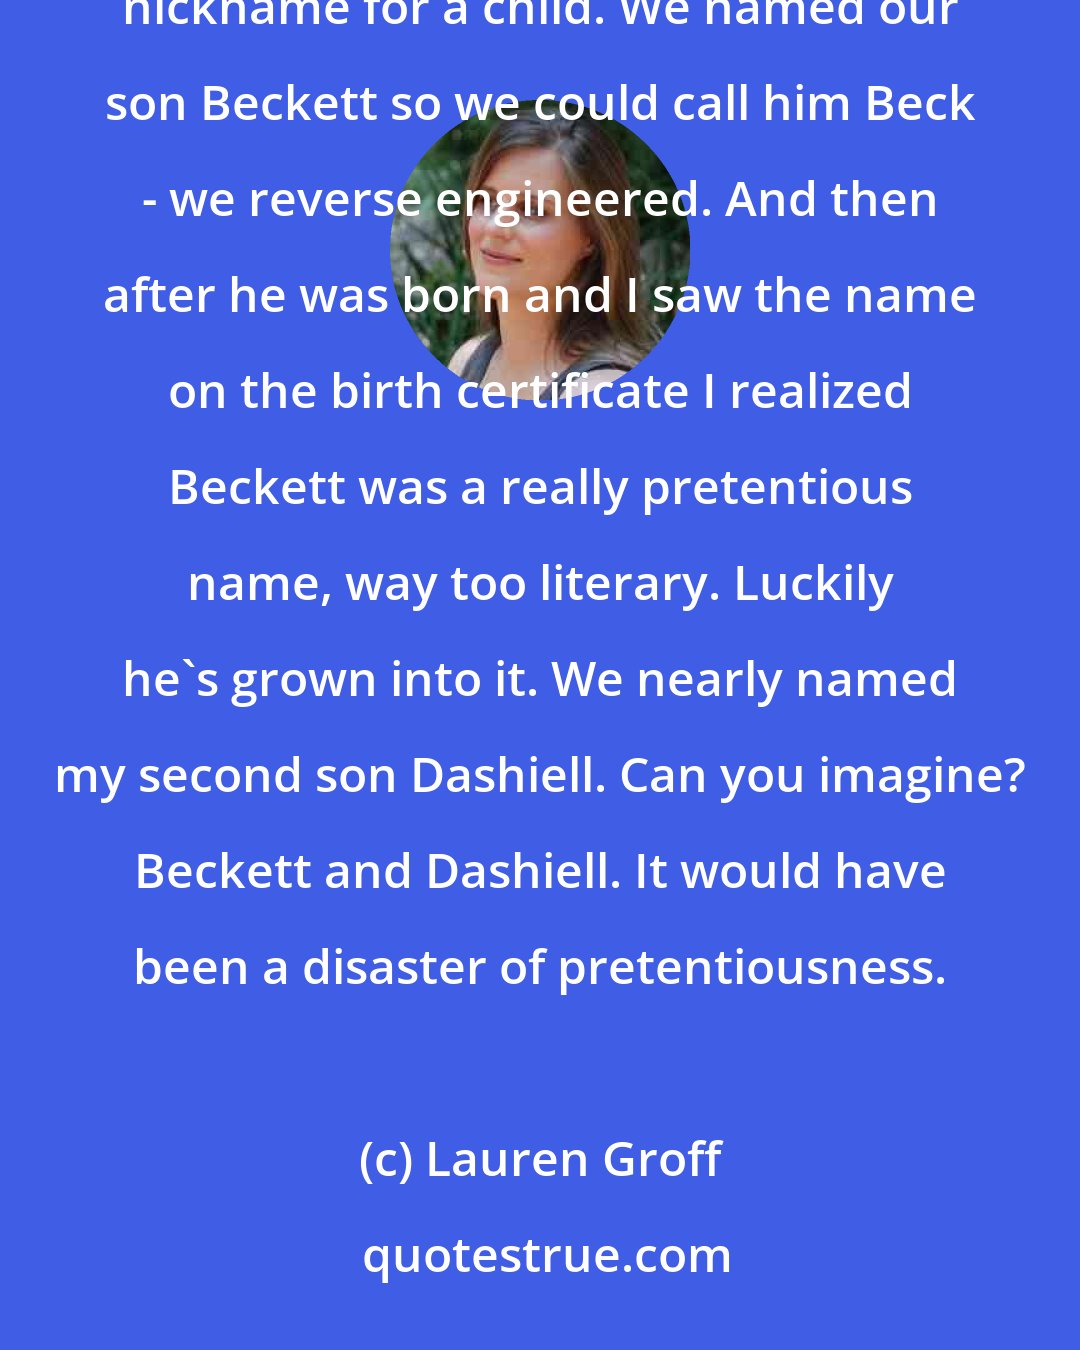 Lauren Groff: My son is actually named after Beck, the musician. We heard Beck on the radio and thought that was a good nickname for a child. We named our son Beckett so we could call him Beck - we reverse engineered. And then after he was born and I saw the name on the birth certificate I realized Beckett was a really pretentious name, way too literary. Luckily he's grown into it. We nearly named my second son Dashiell. Can you imagine? Beckett and Dashiell. It would have been a disaster of pretentiousness.